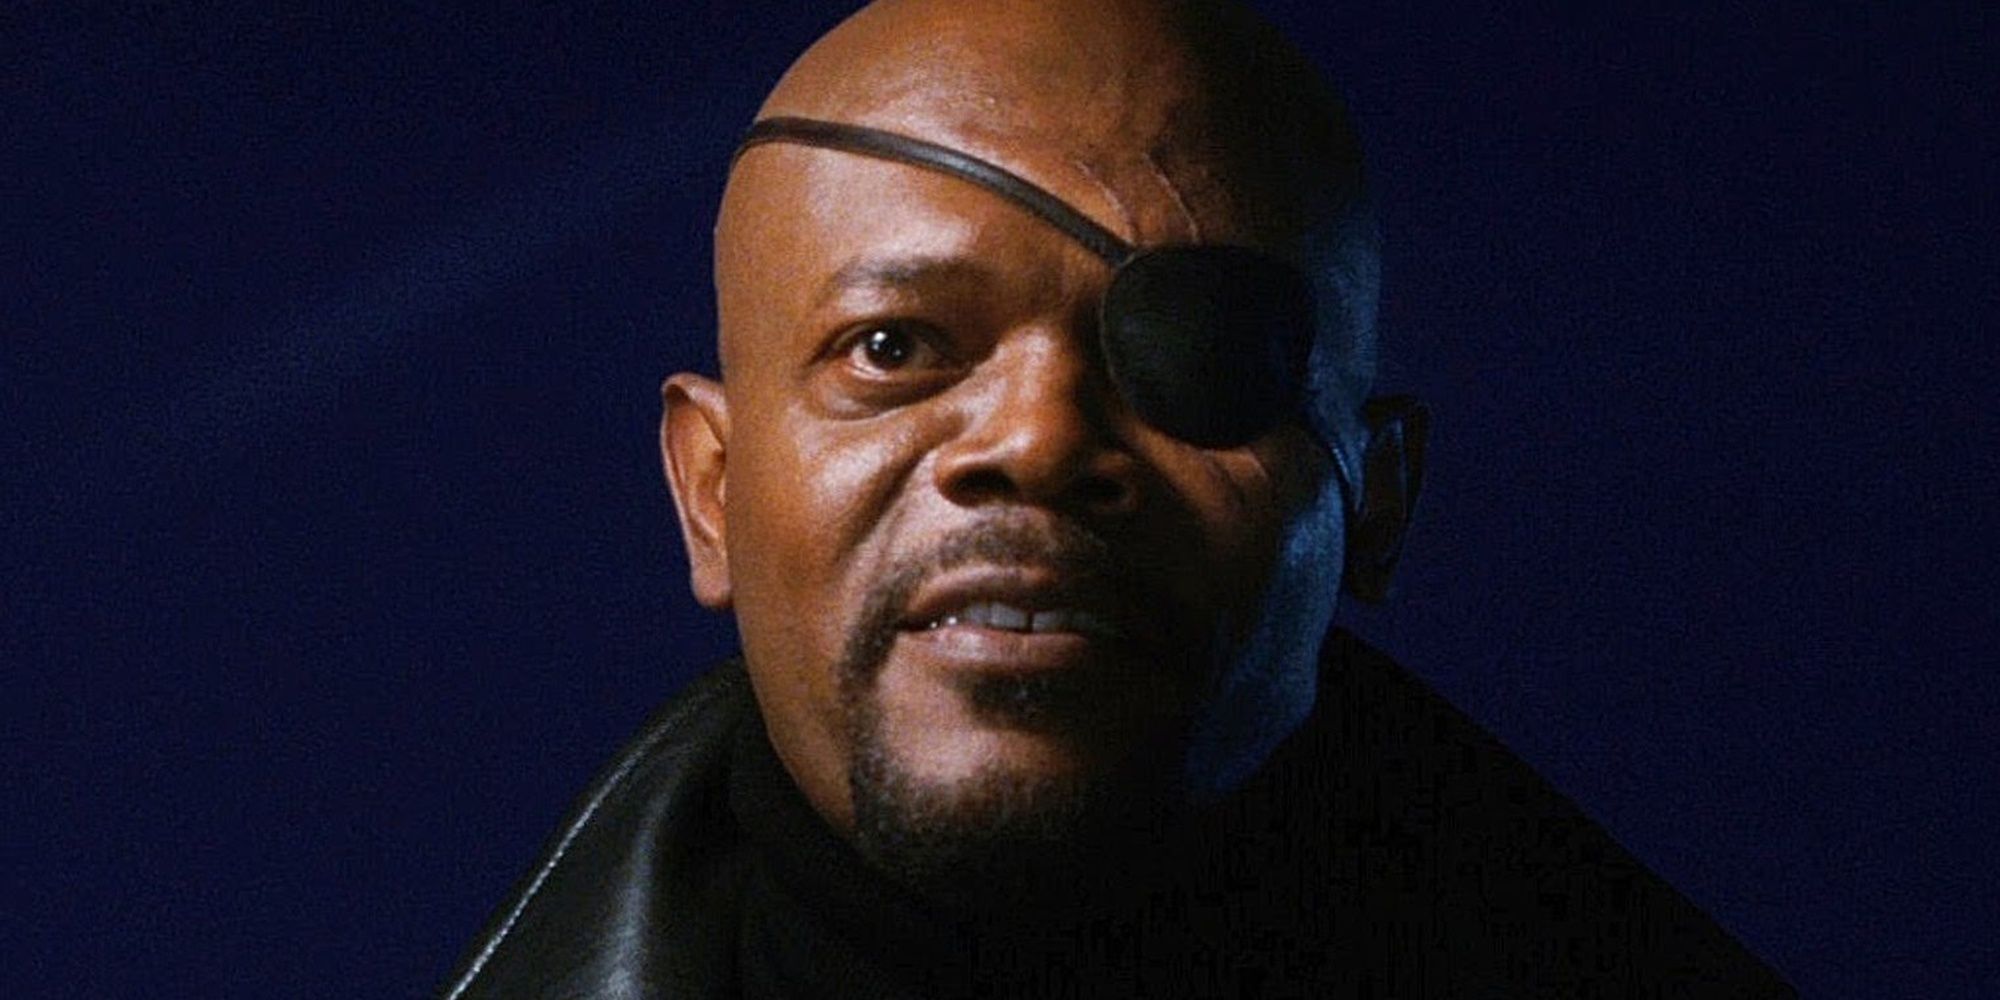 nick fury in in the first iron man movie